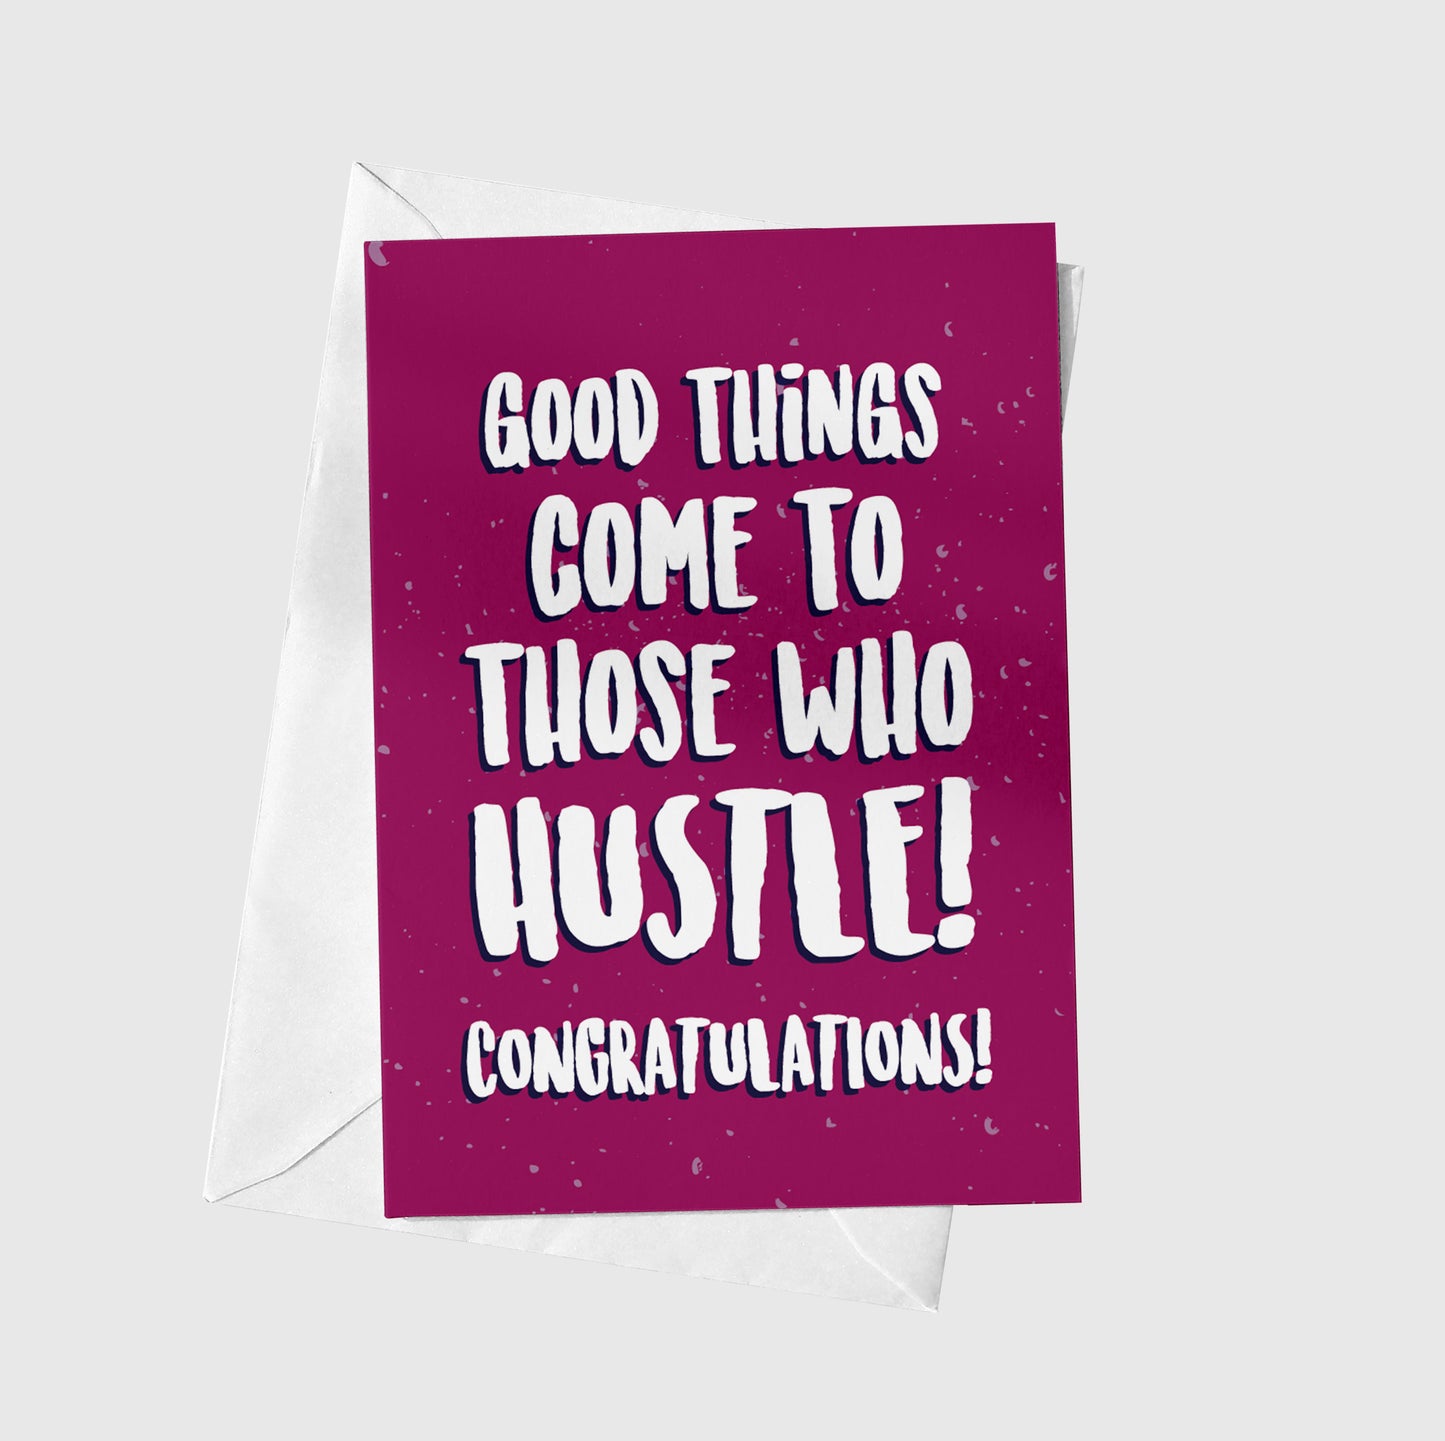 Good Things Come To Those Who Hustle!